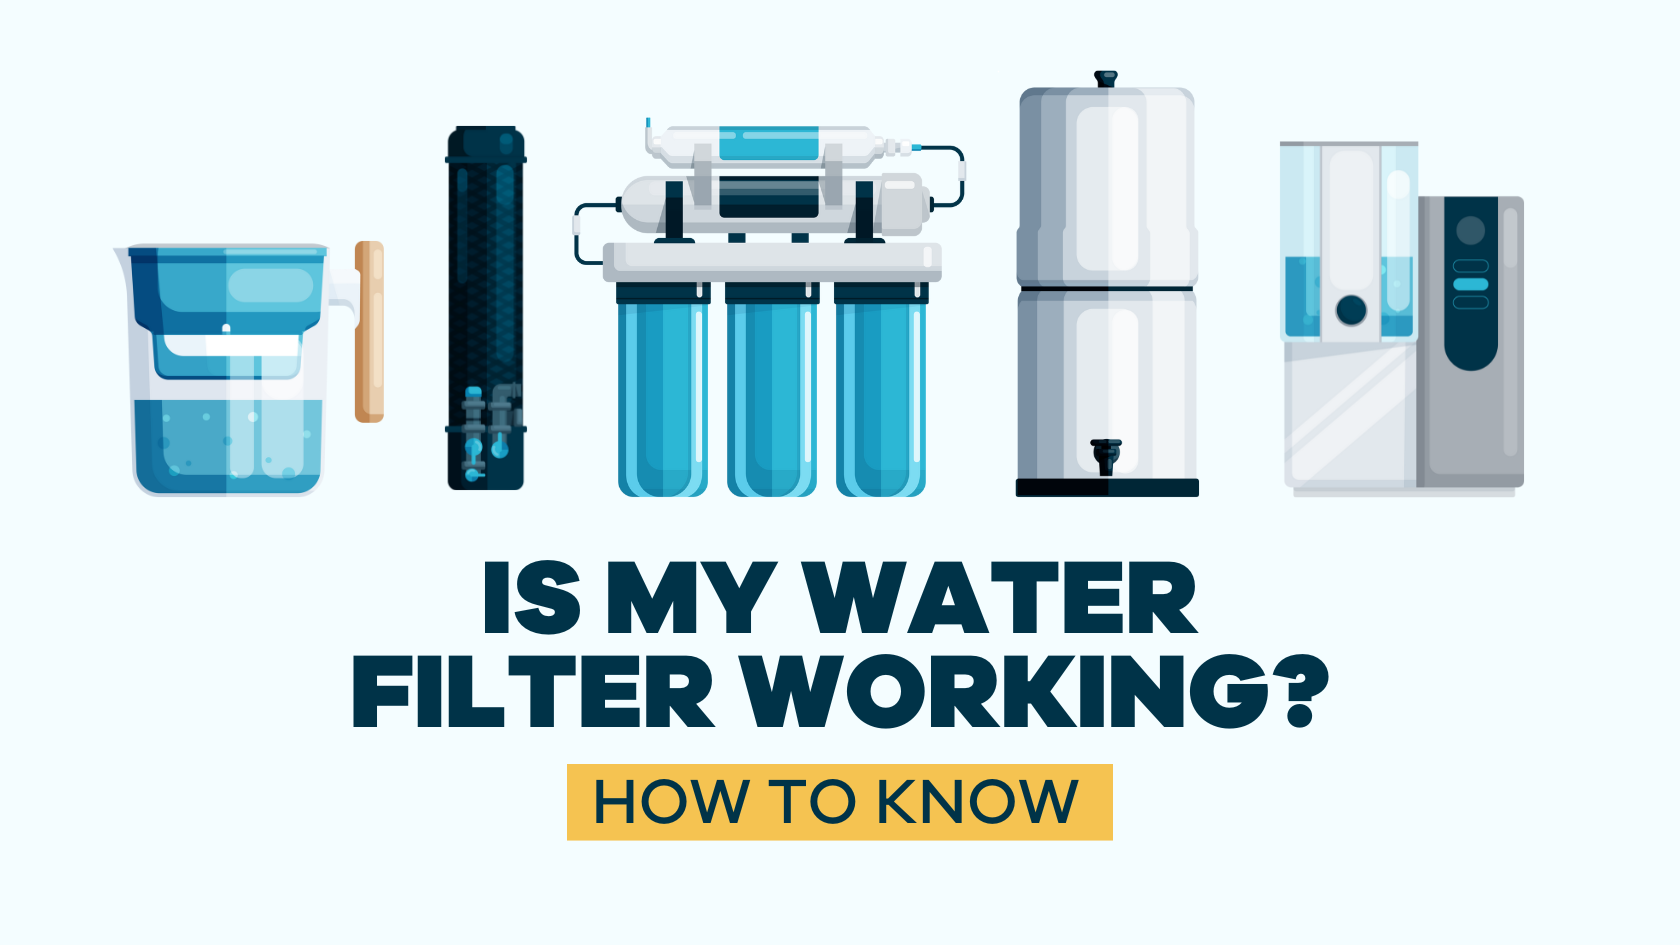 How Do Refrigerator Water Filters Work?